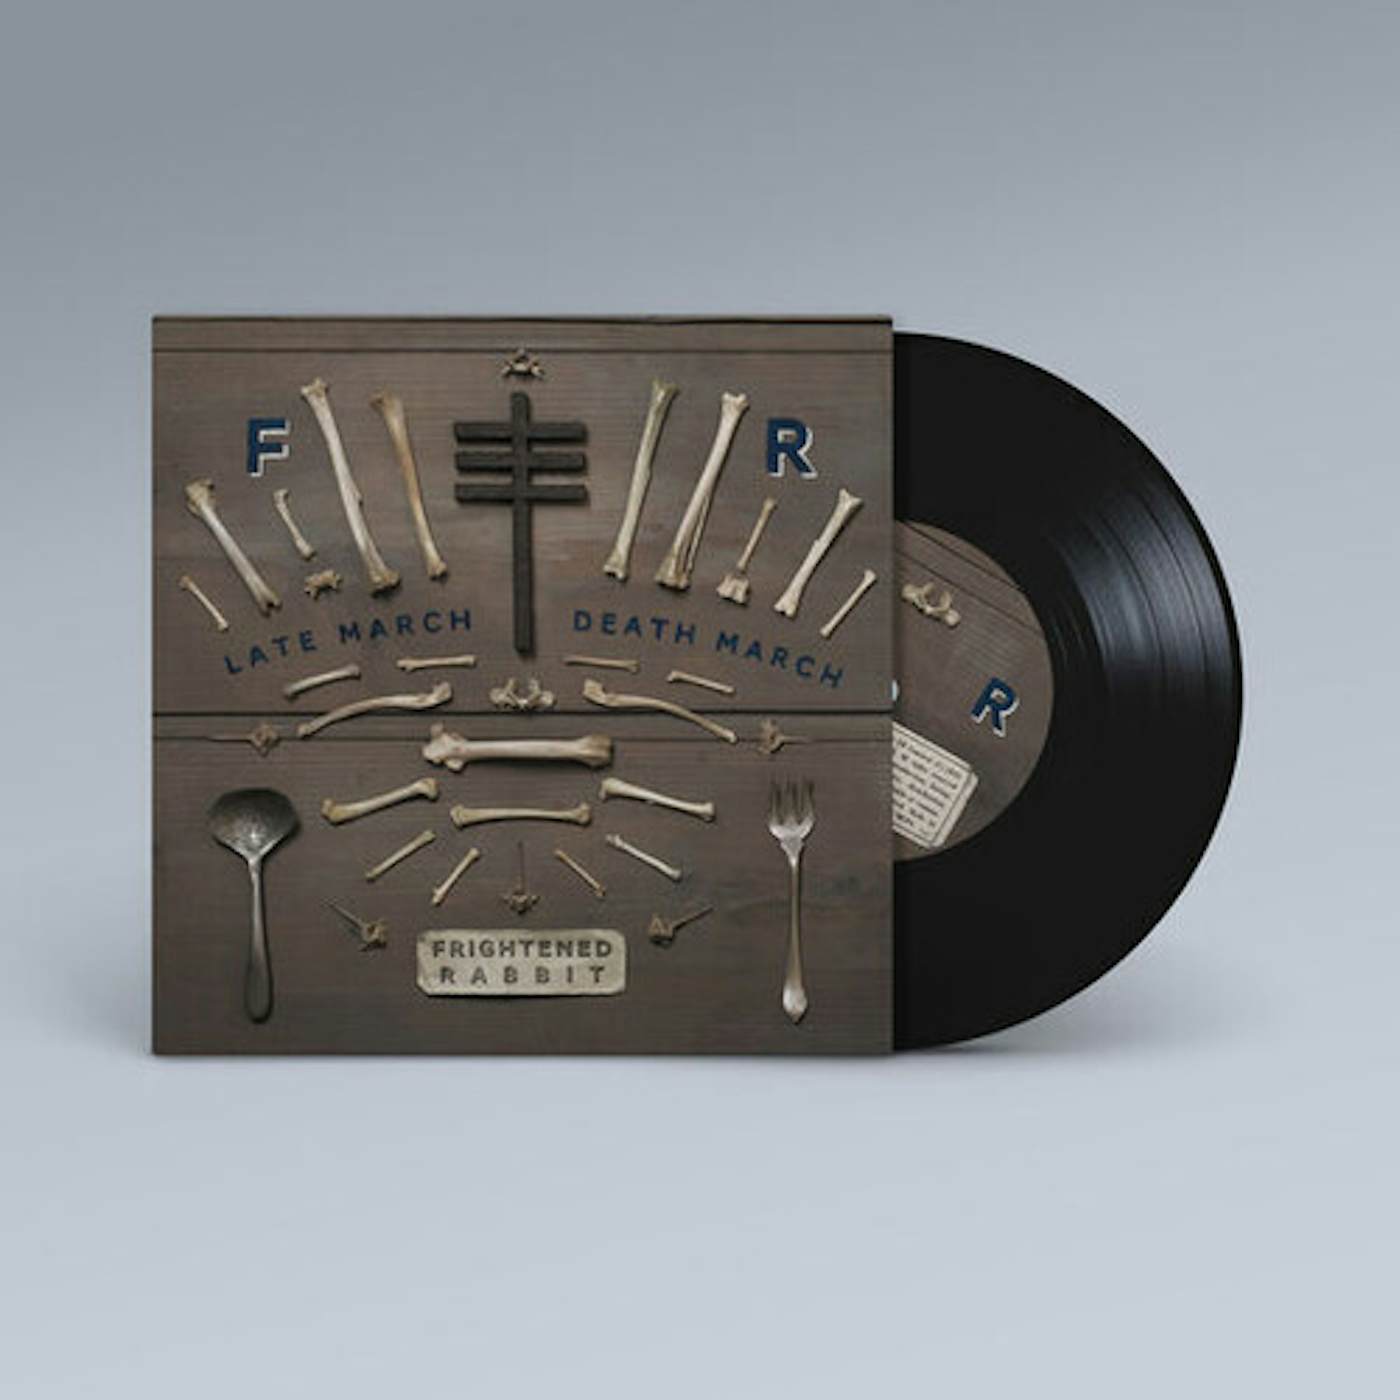 Frightened Rabbit LATE MARCH DEATH MARCH: 10TH ANNIVERSARY Vinyl Record